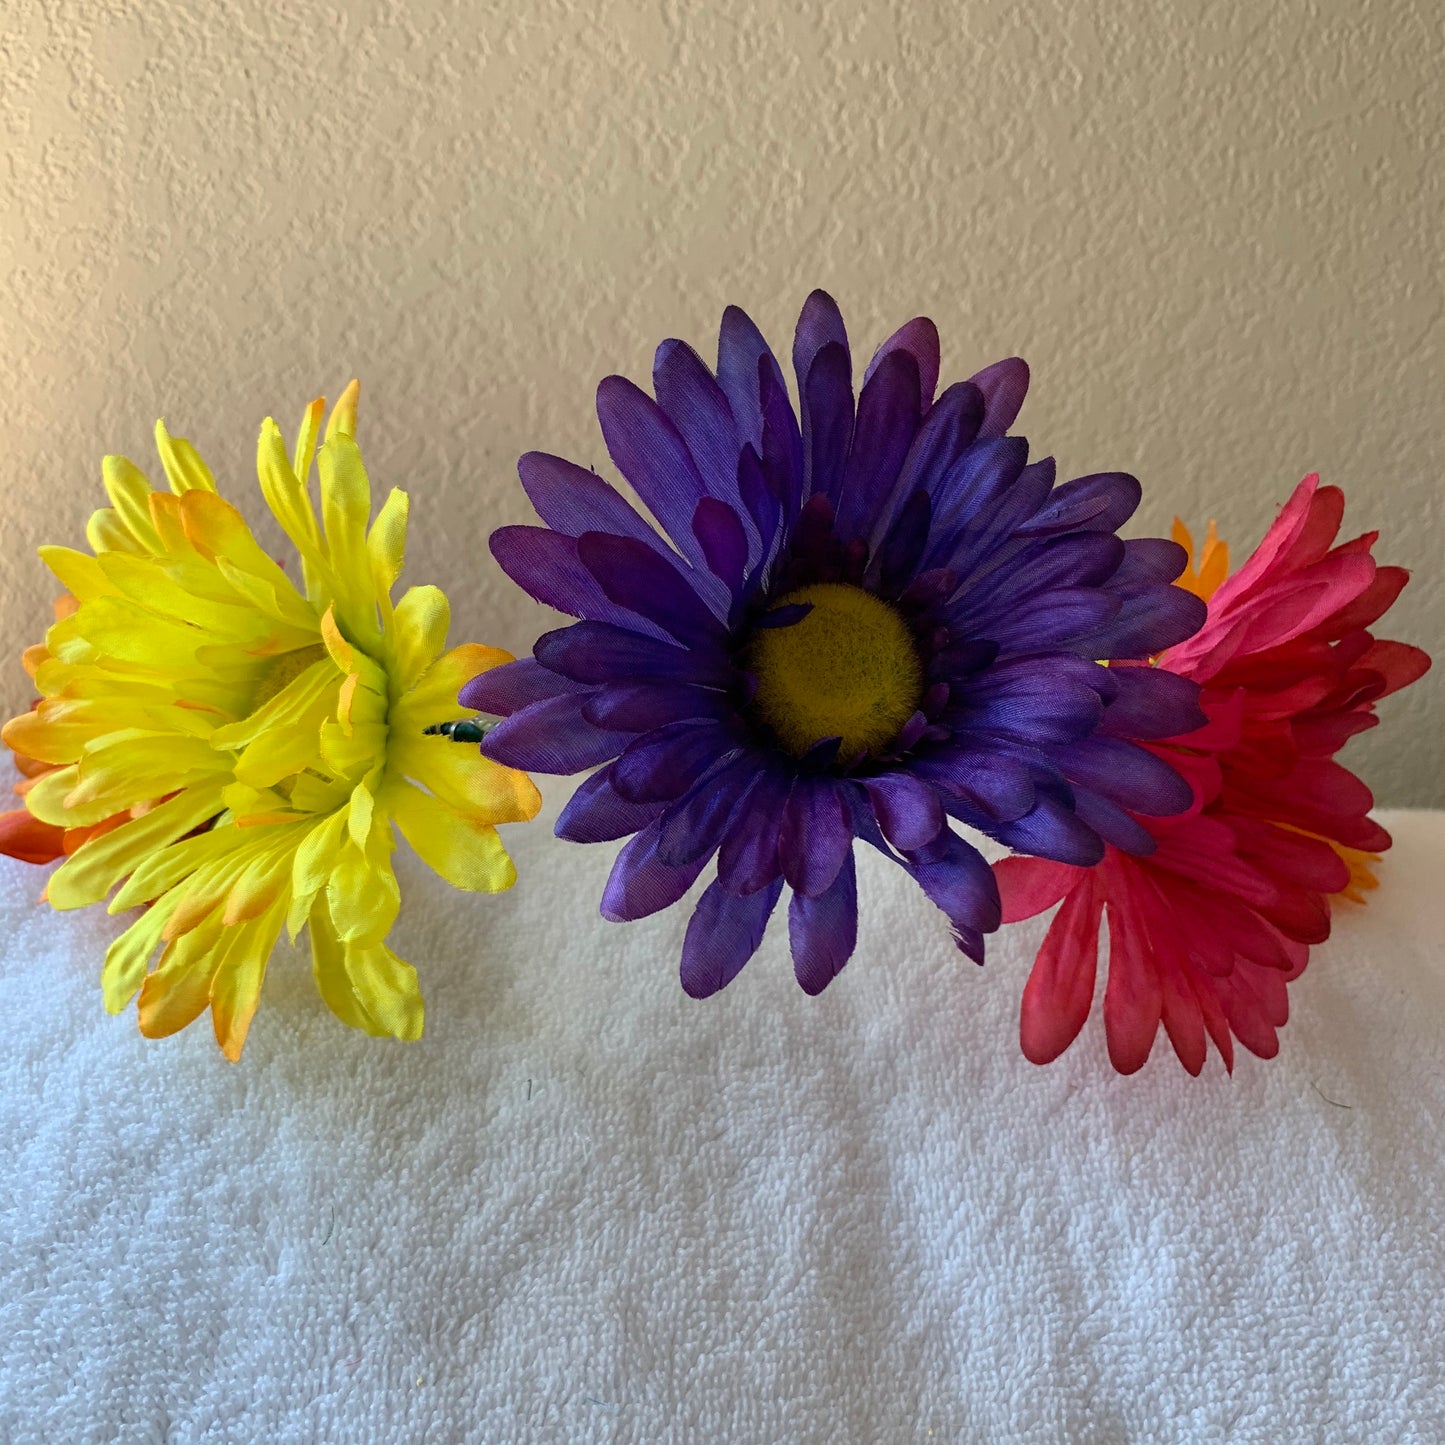 Large Wreath Lighted - Purple, Pink, Yellow, and Orange Daisies